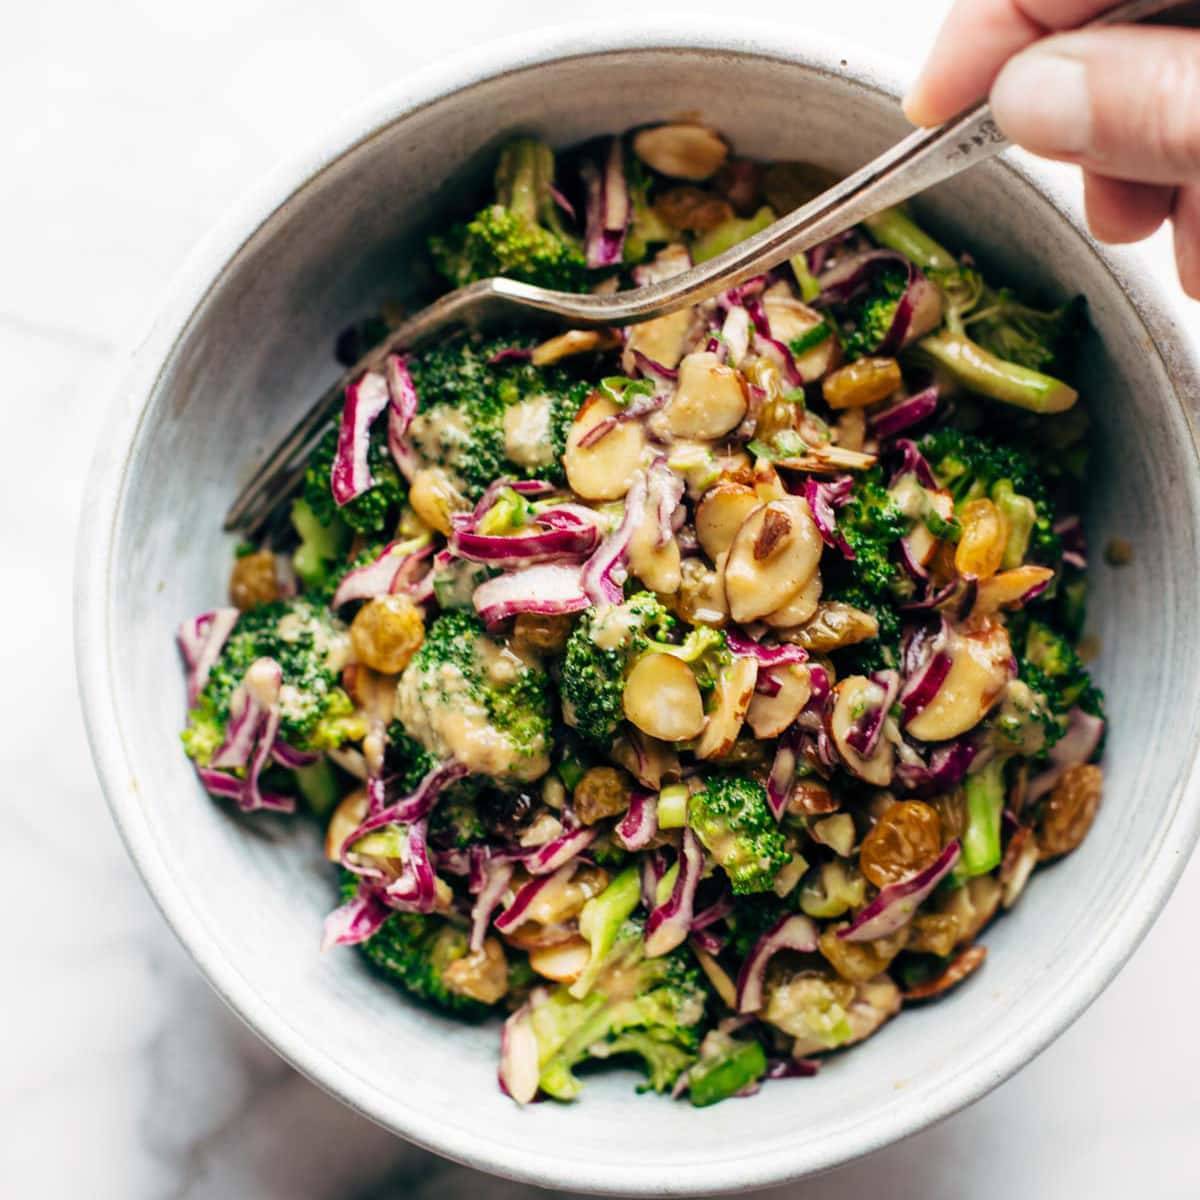 Clean Broccoli salad in a bowl with a fork.